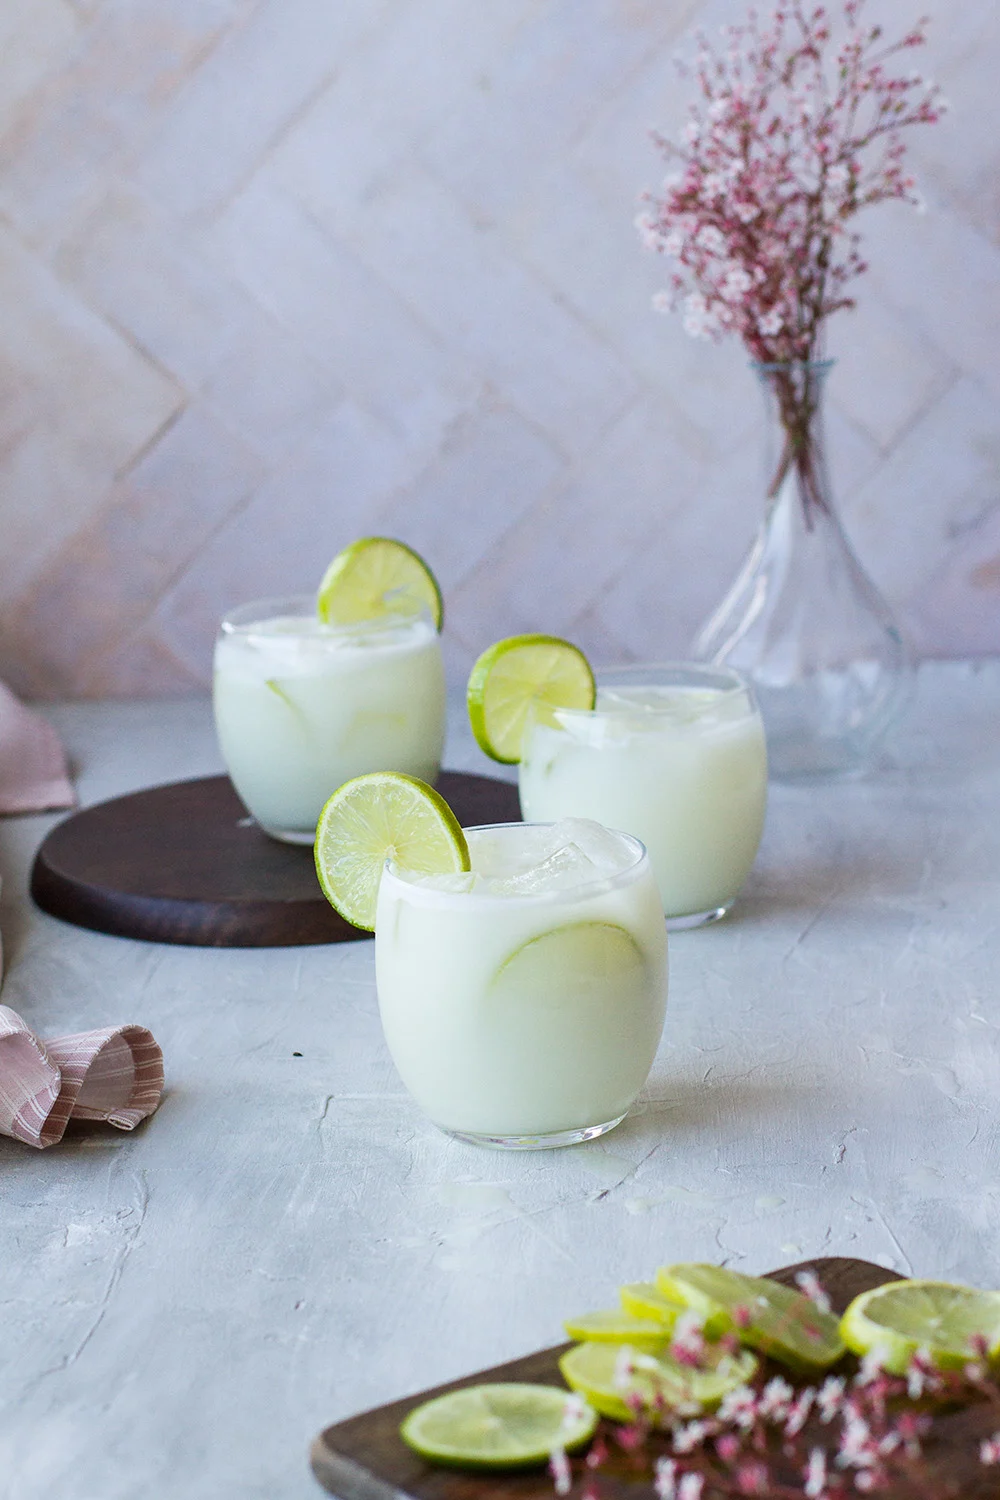 Round glasses filled with Swiss lemonade and garnished with lime wheels.